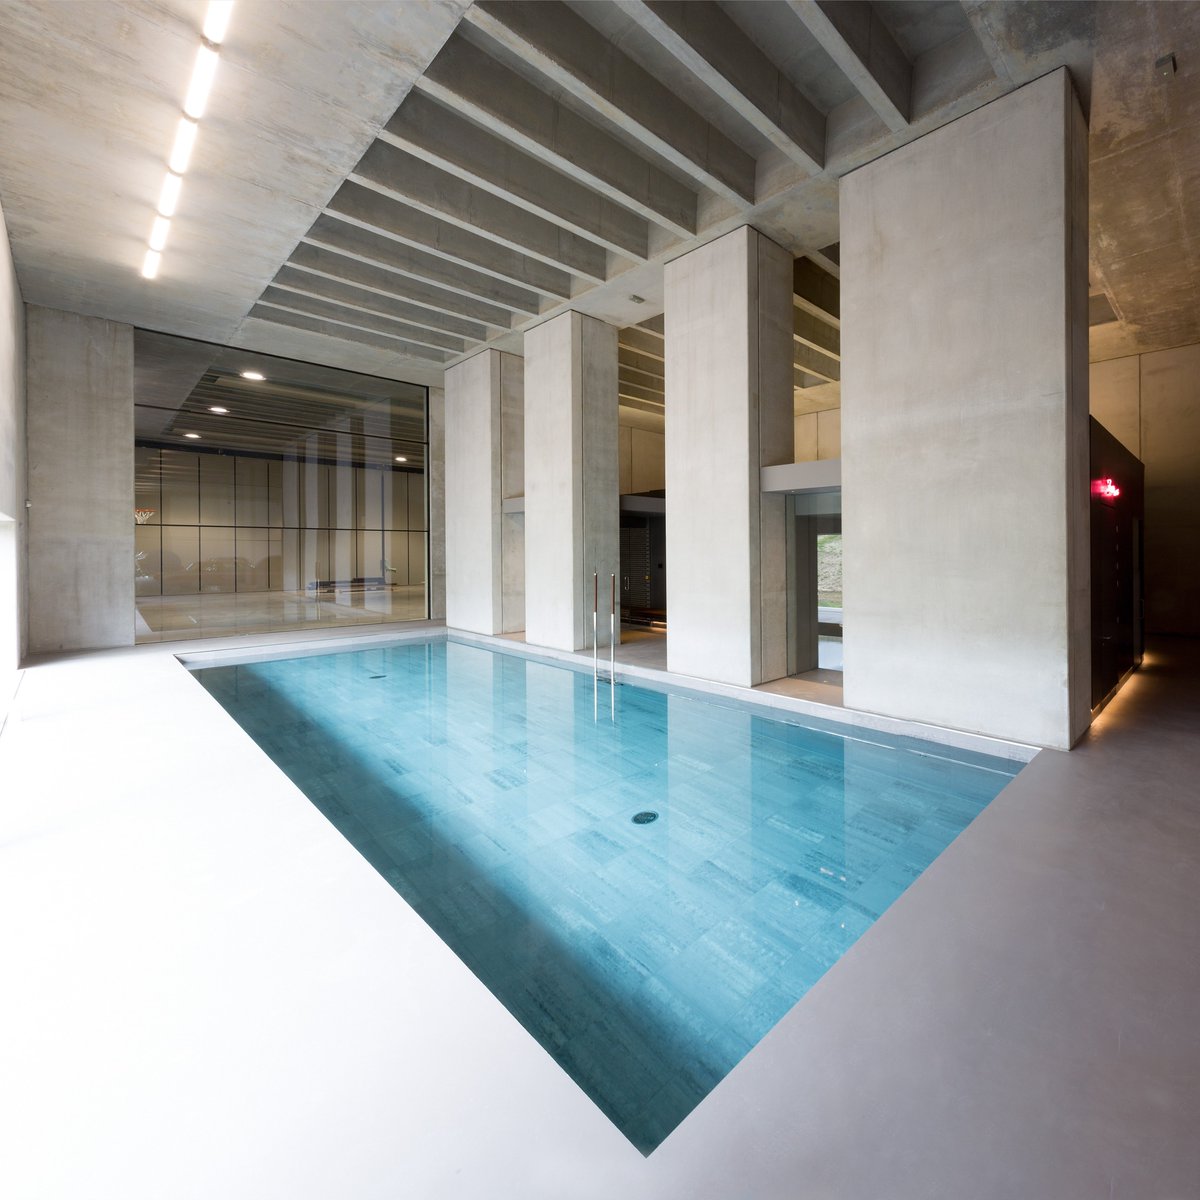 No matter the weather, it’s time for a swim!🏊‍♂️ Which indoor swimming pool is your favourite? #indoorswimmingpool #interiordesign #pools